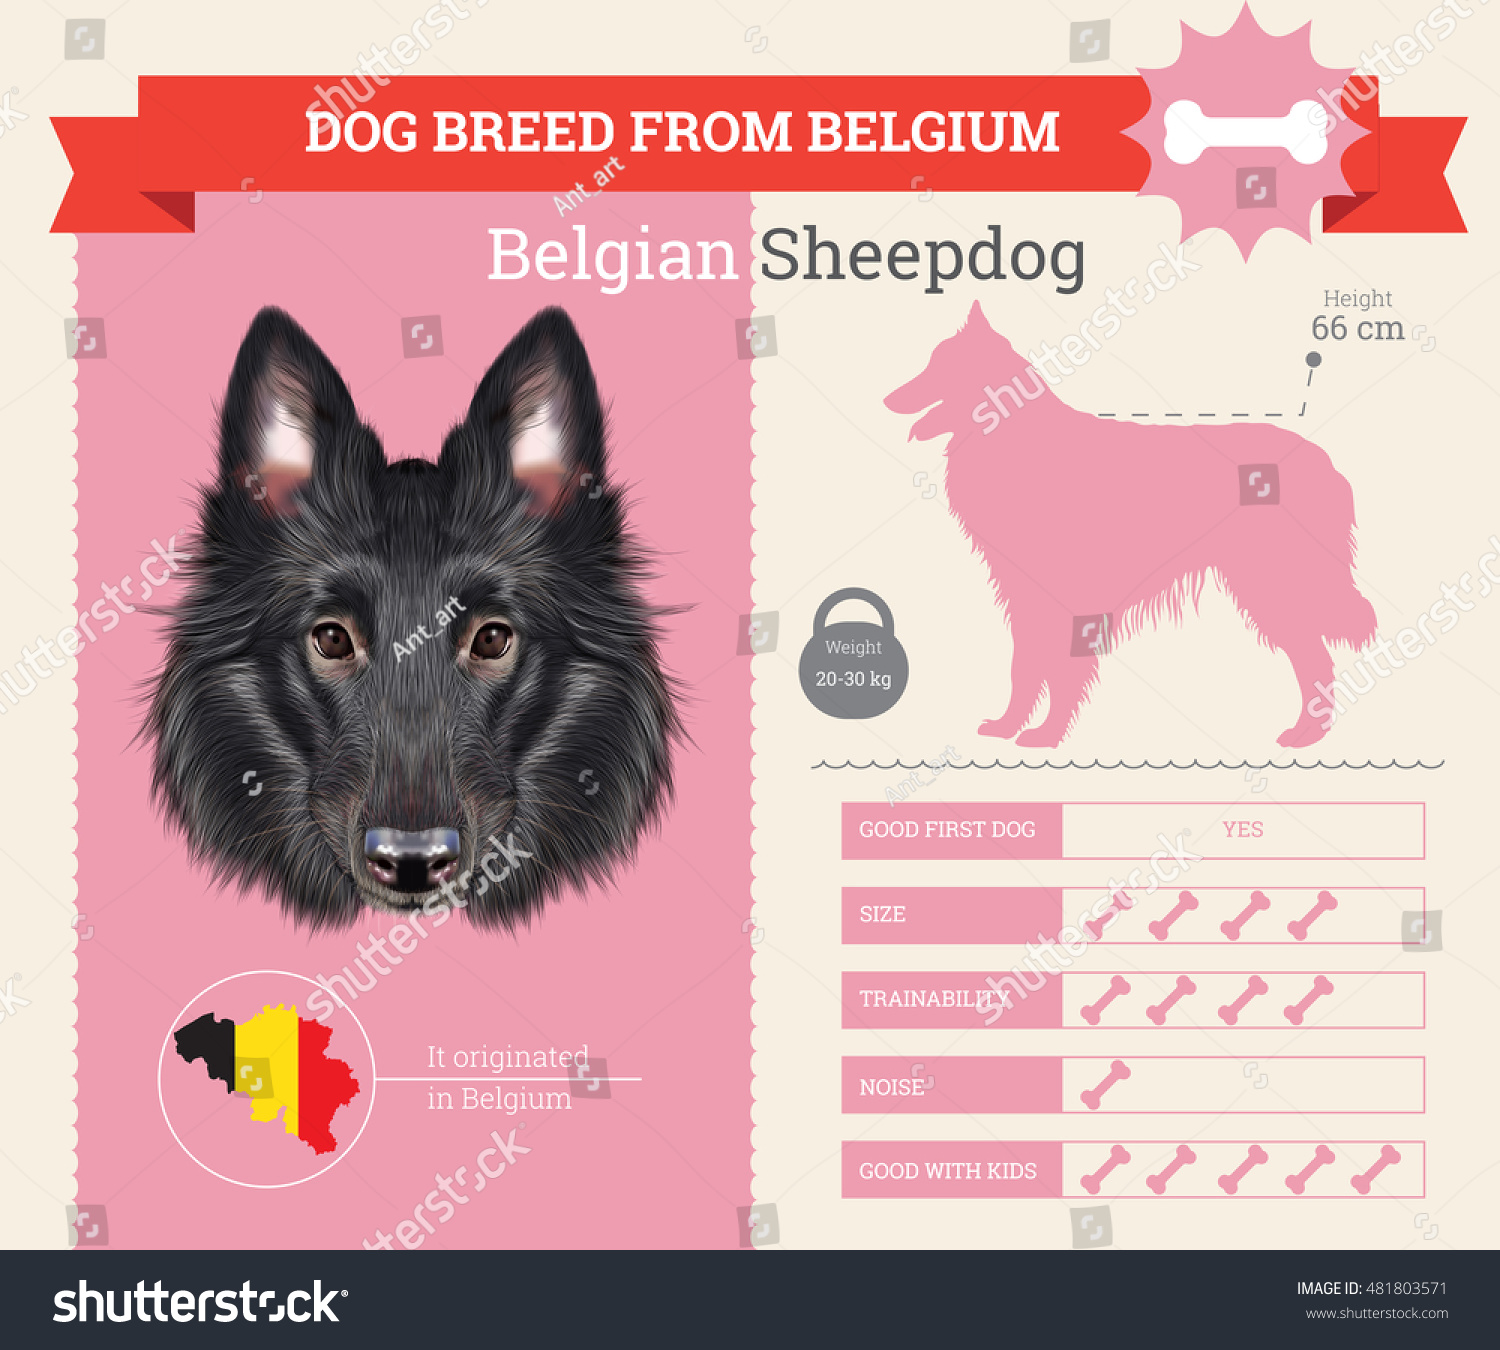 SVG of Belgian Sheepdog dog breed vector info graphics. This dog breed from Belgium svg